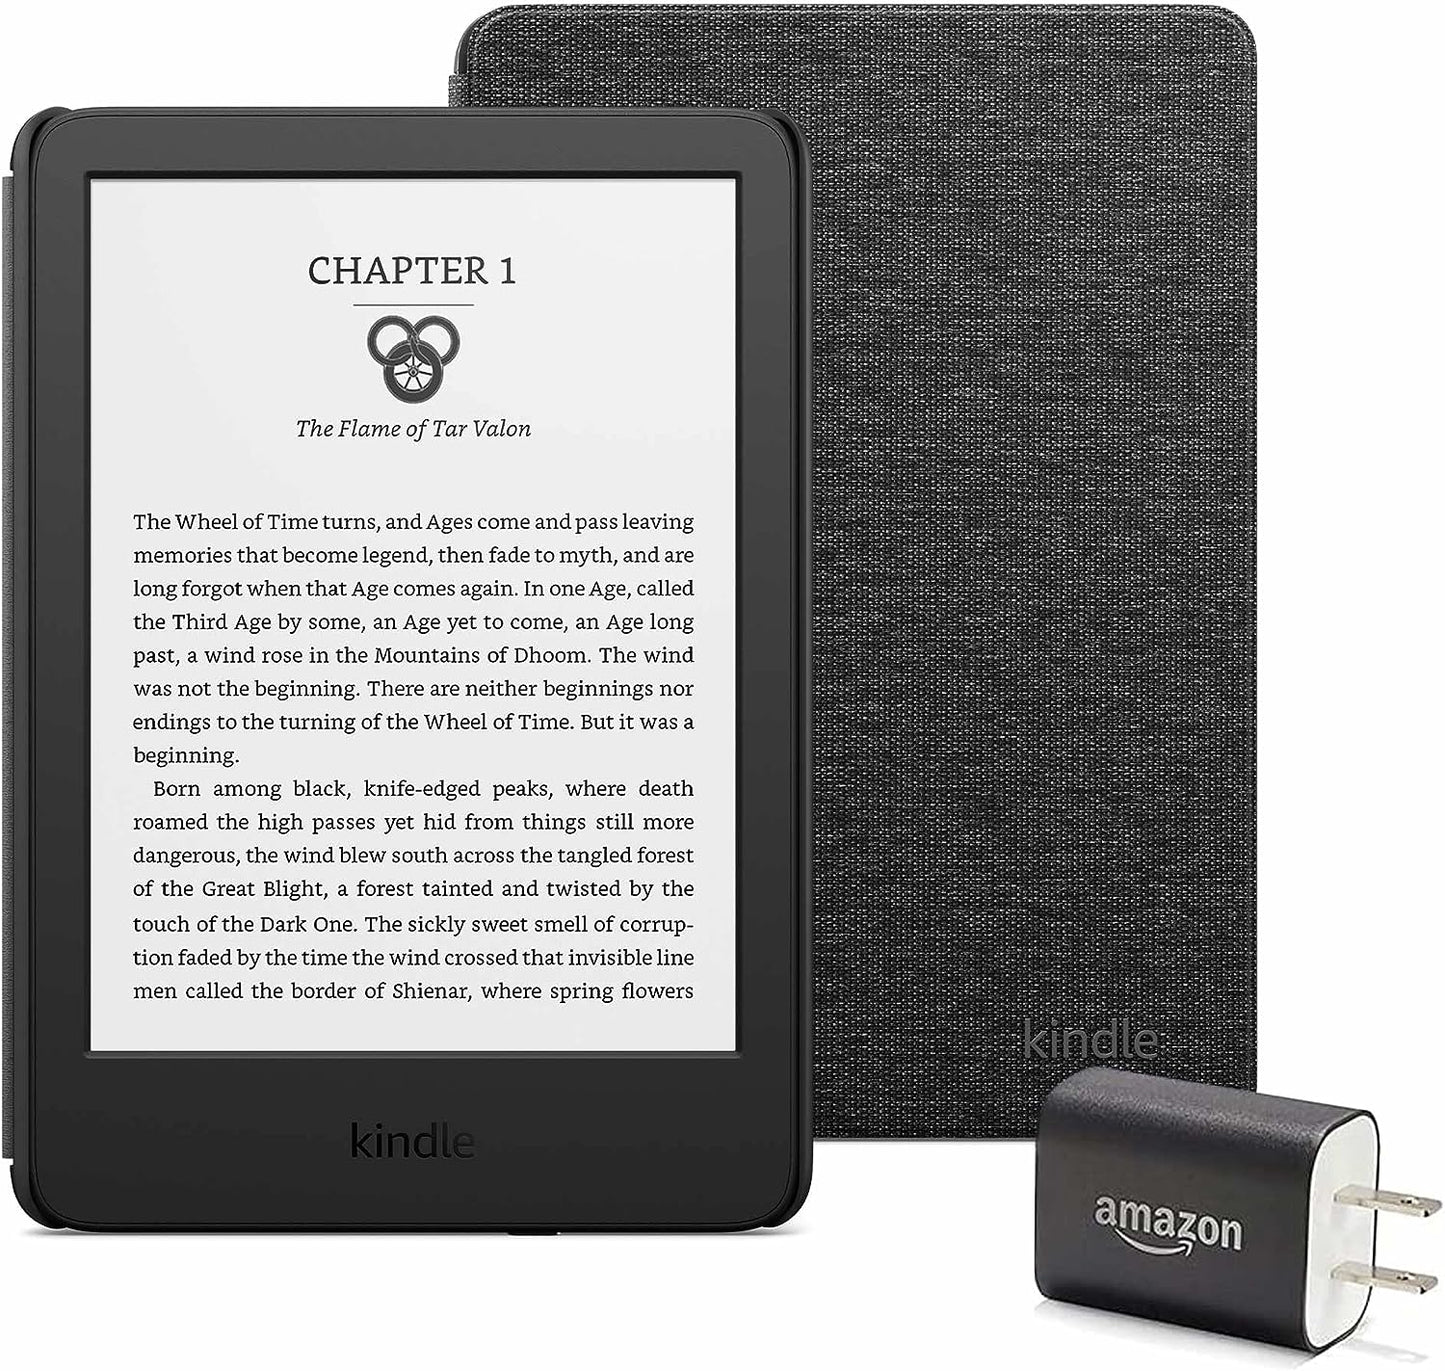 Kindle Essentials Bundle including Kindle (2022 release) - Black - Without Lockscreen Ads, Fabric Cover - Rose, and Power Adapter